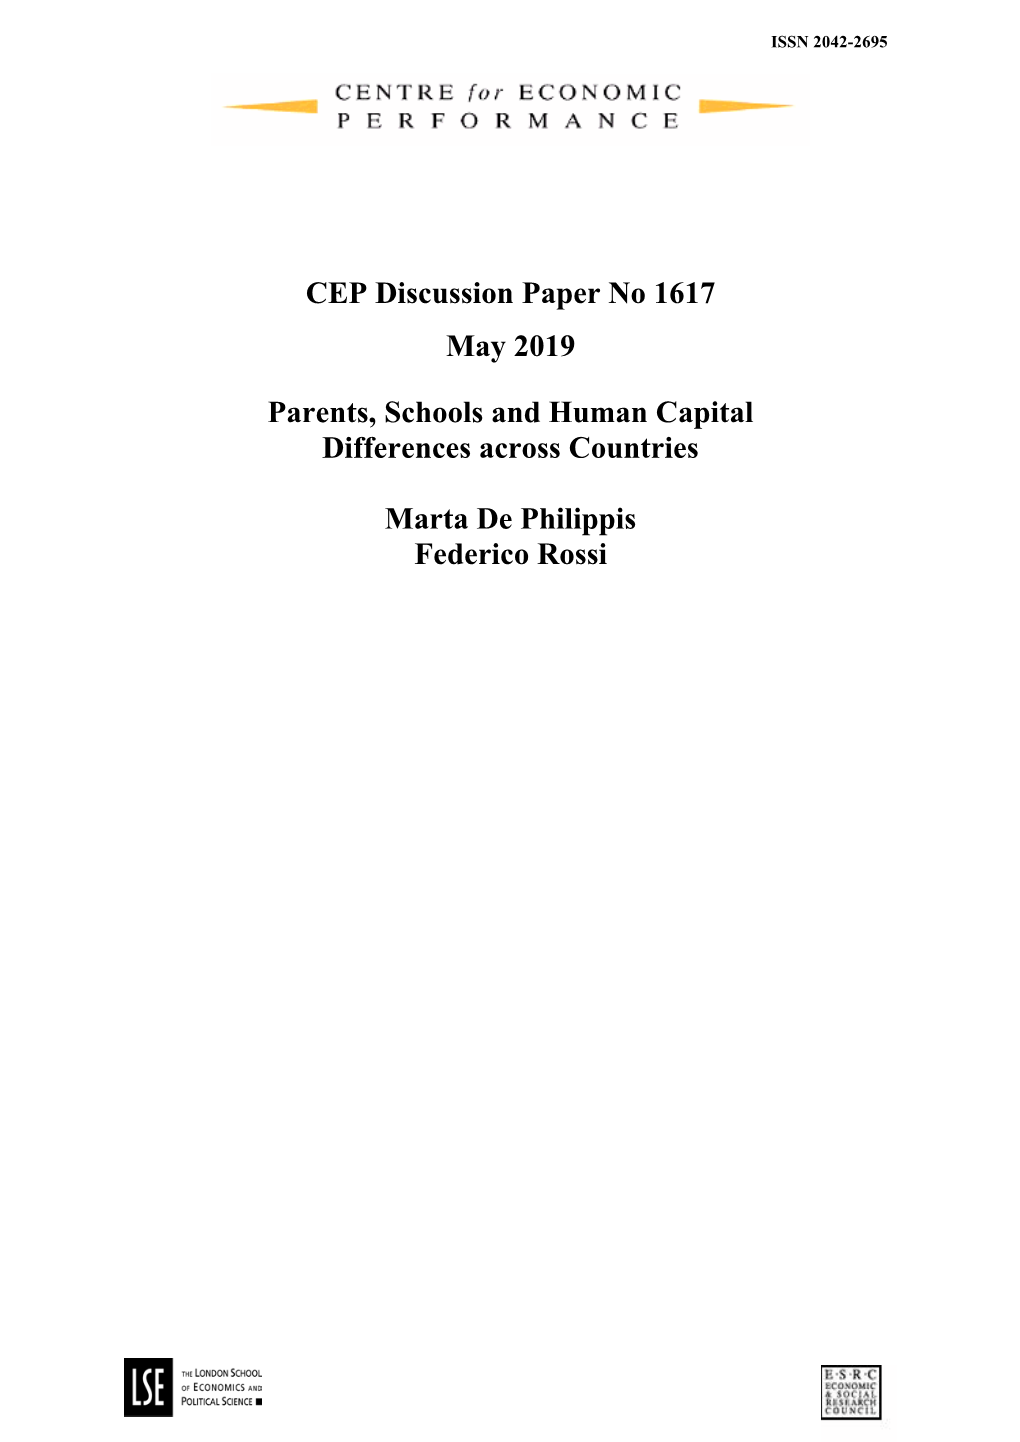 CEP Discussion Paper No 1617 May 2019 Parents, Schools and Human